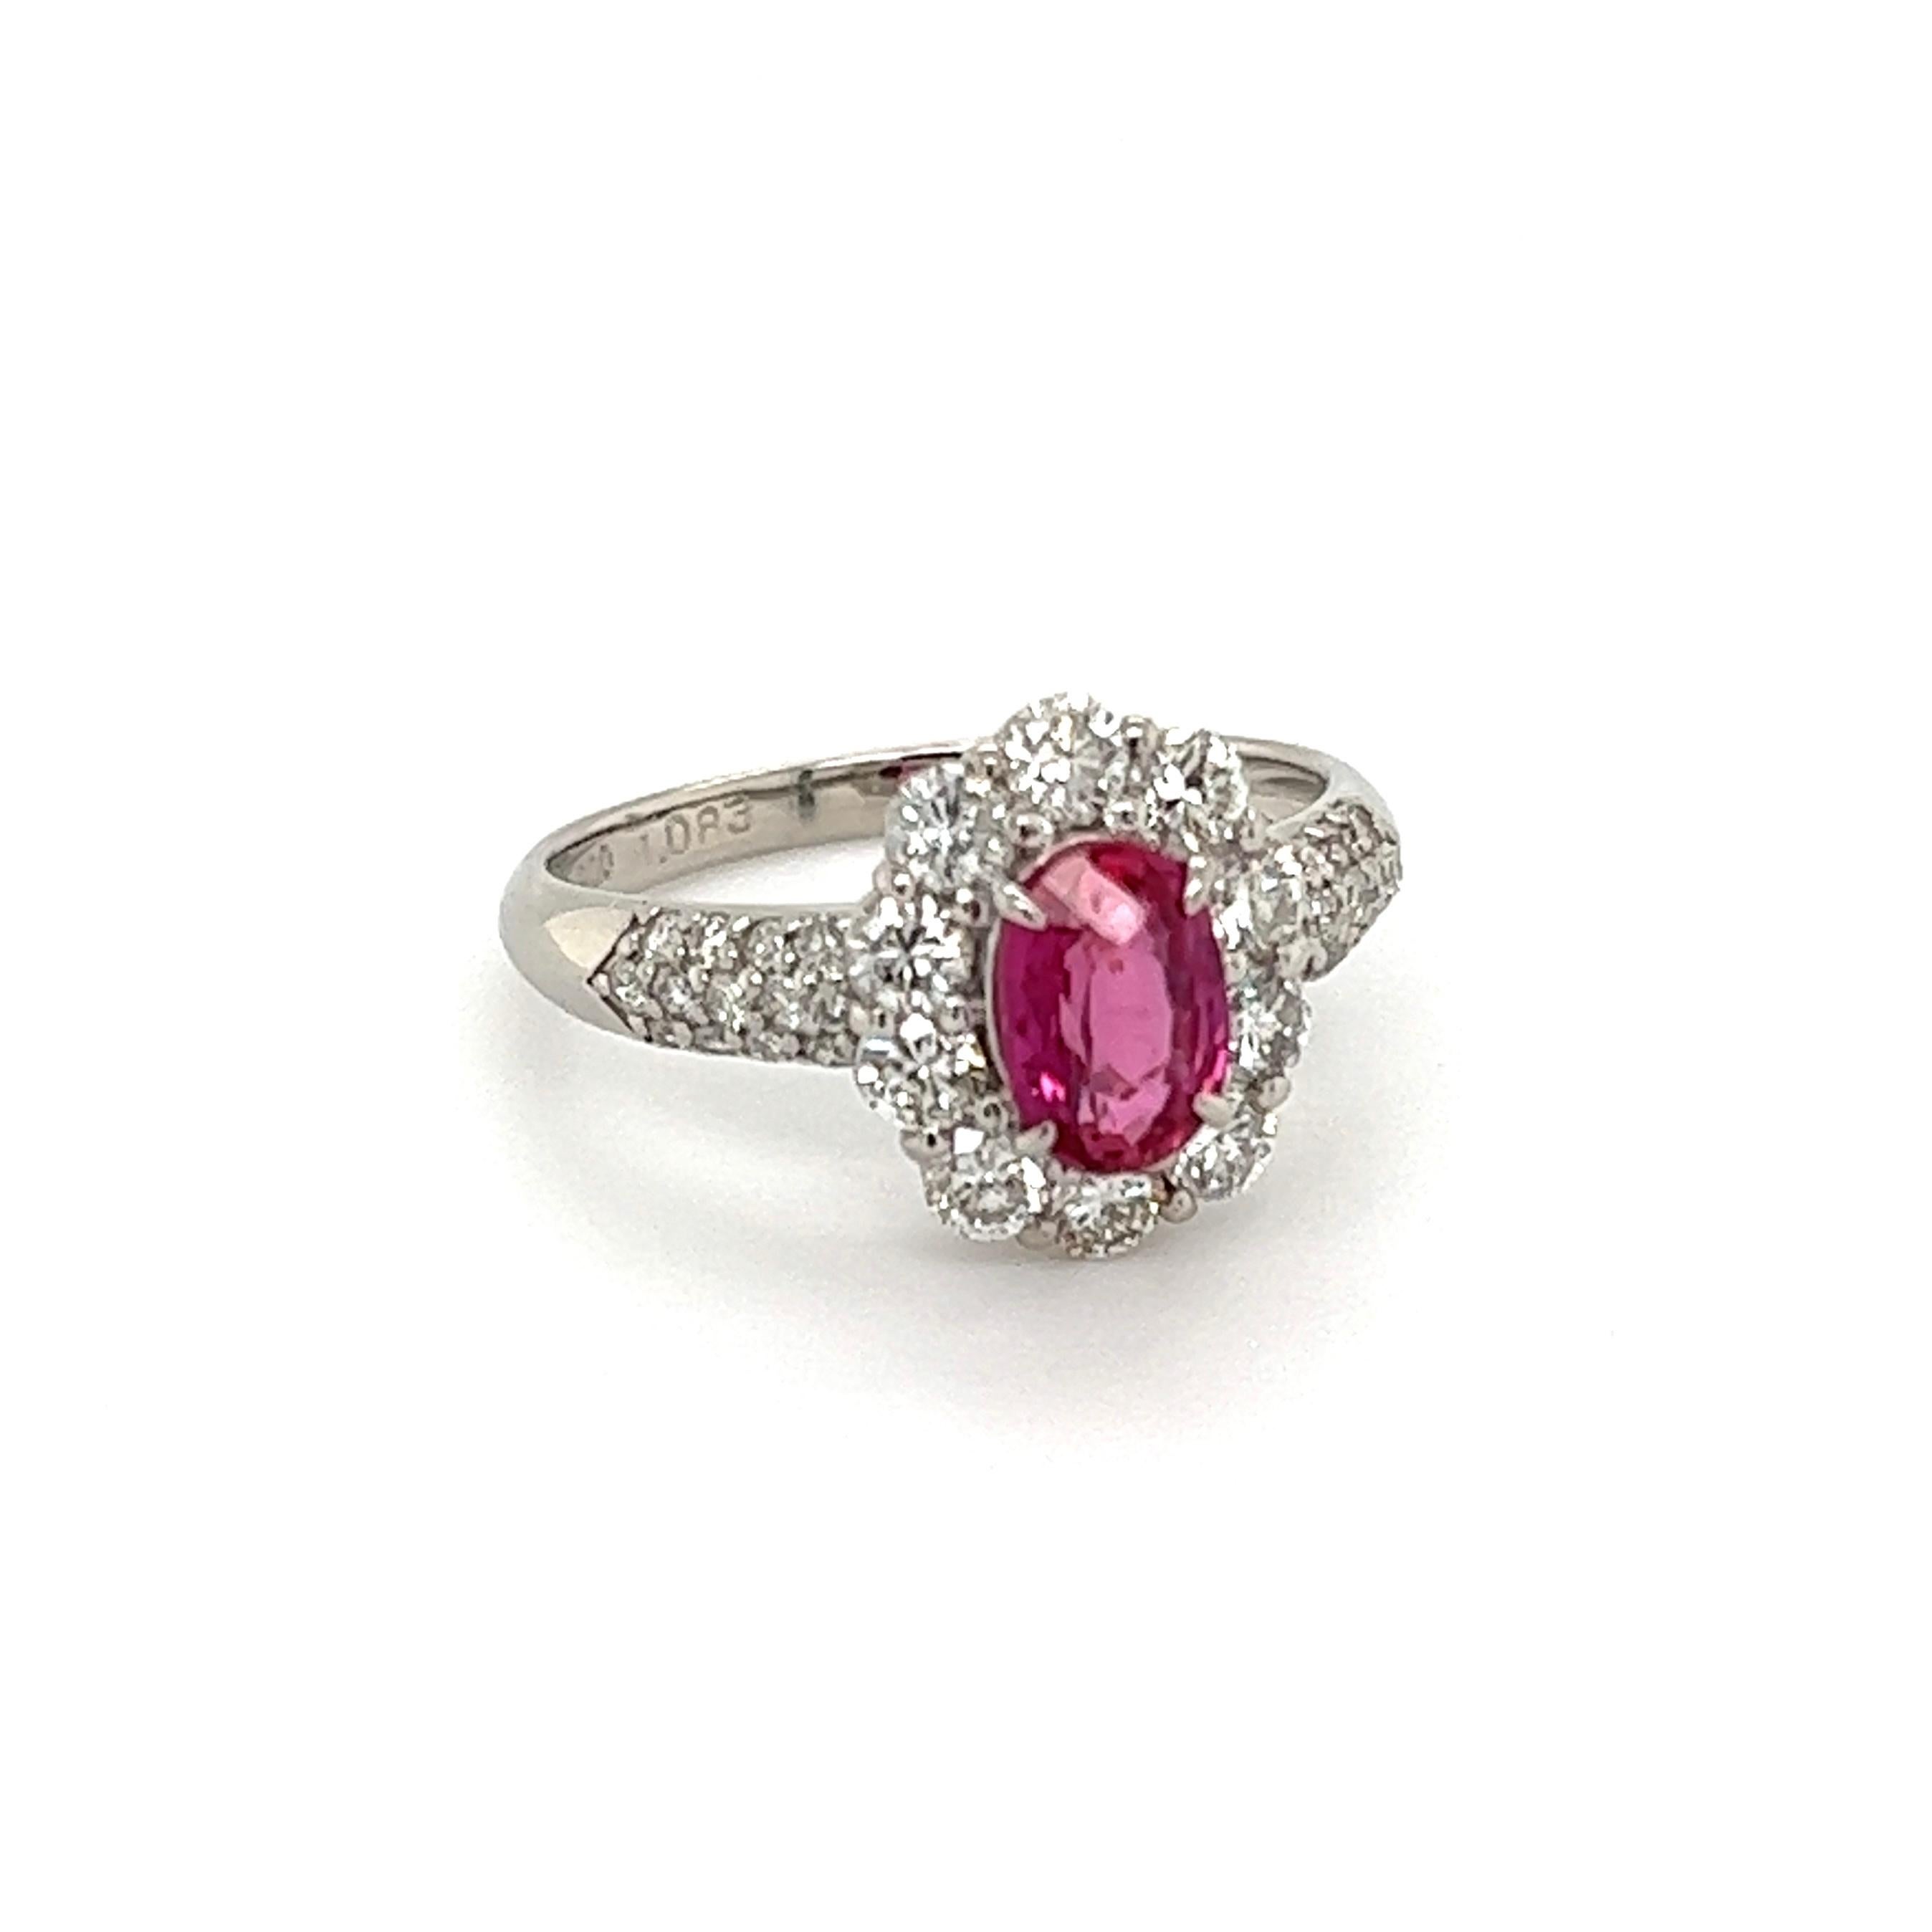 Simply Beautiful! Finely detailed Awesome Platinum Ring, center securely nestled with an Oval Burma Ruby weighing approx. 1.08 Carat. GIA lab report #2195974816, stating Burma origin and NO indications of heat treatment. Surrounded by Diamonds,